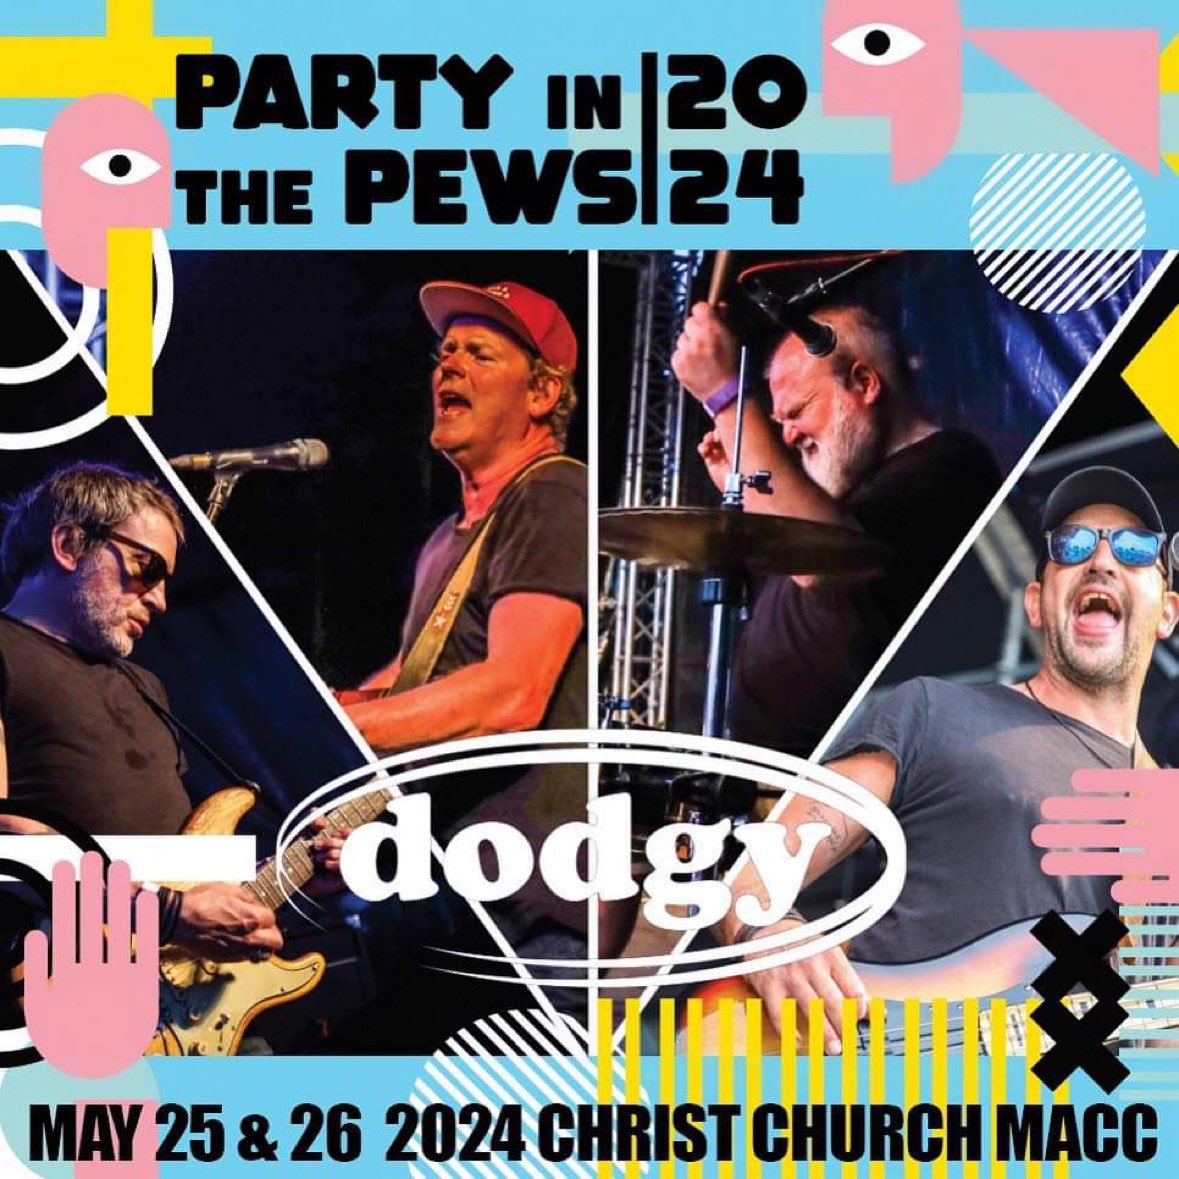 This band are most definitely “Good Enough” Us at @partyinthepews are absolutely beside ourselves to have @DodgyUK play our stage this year!!